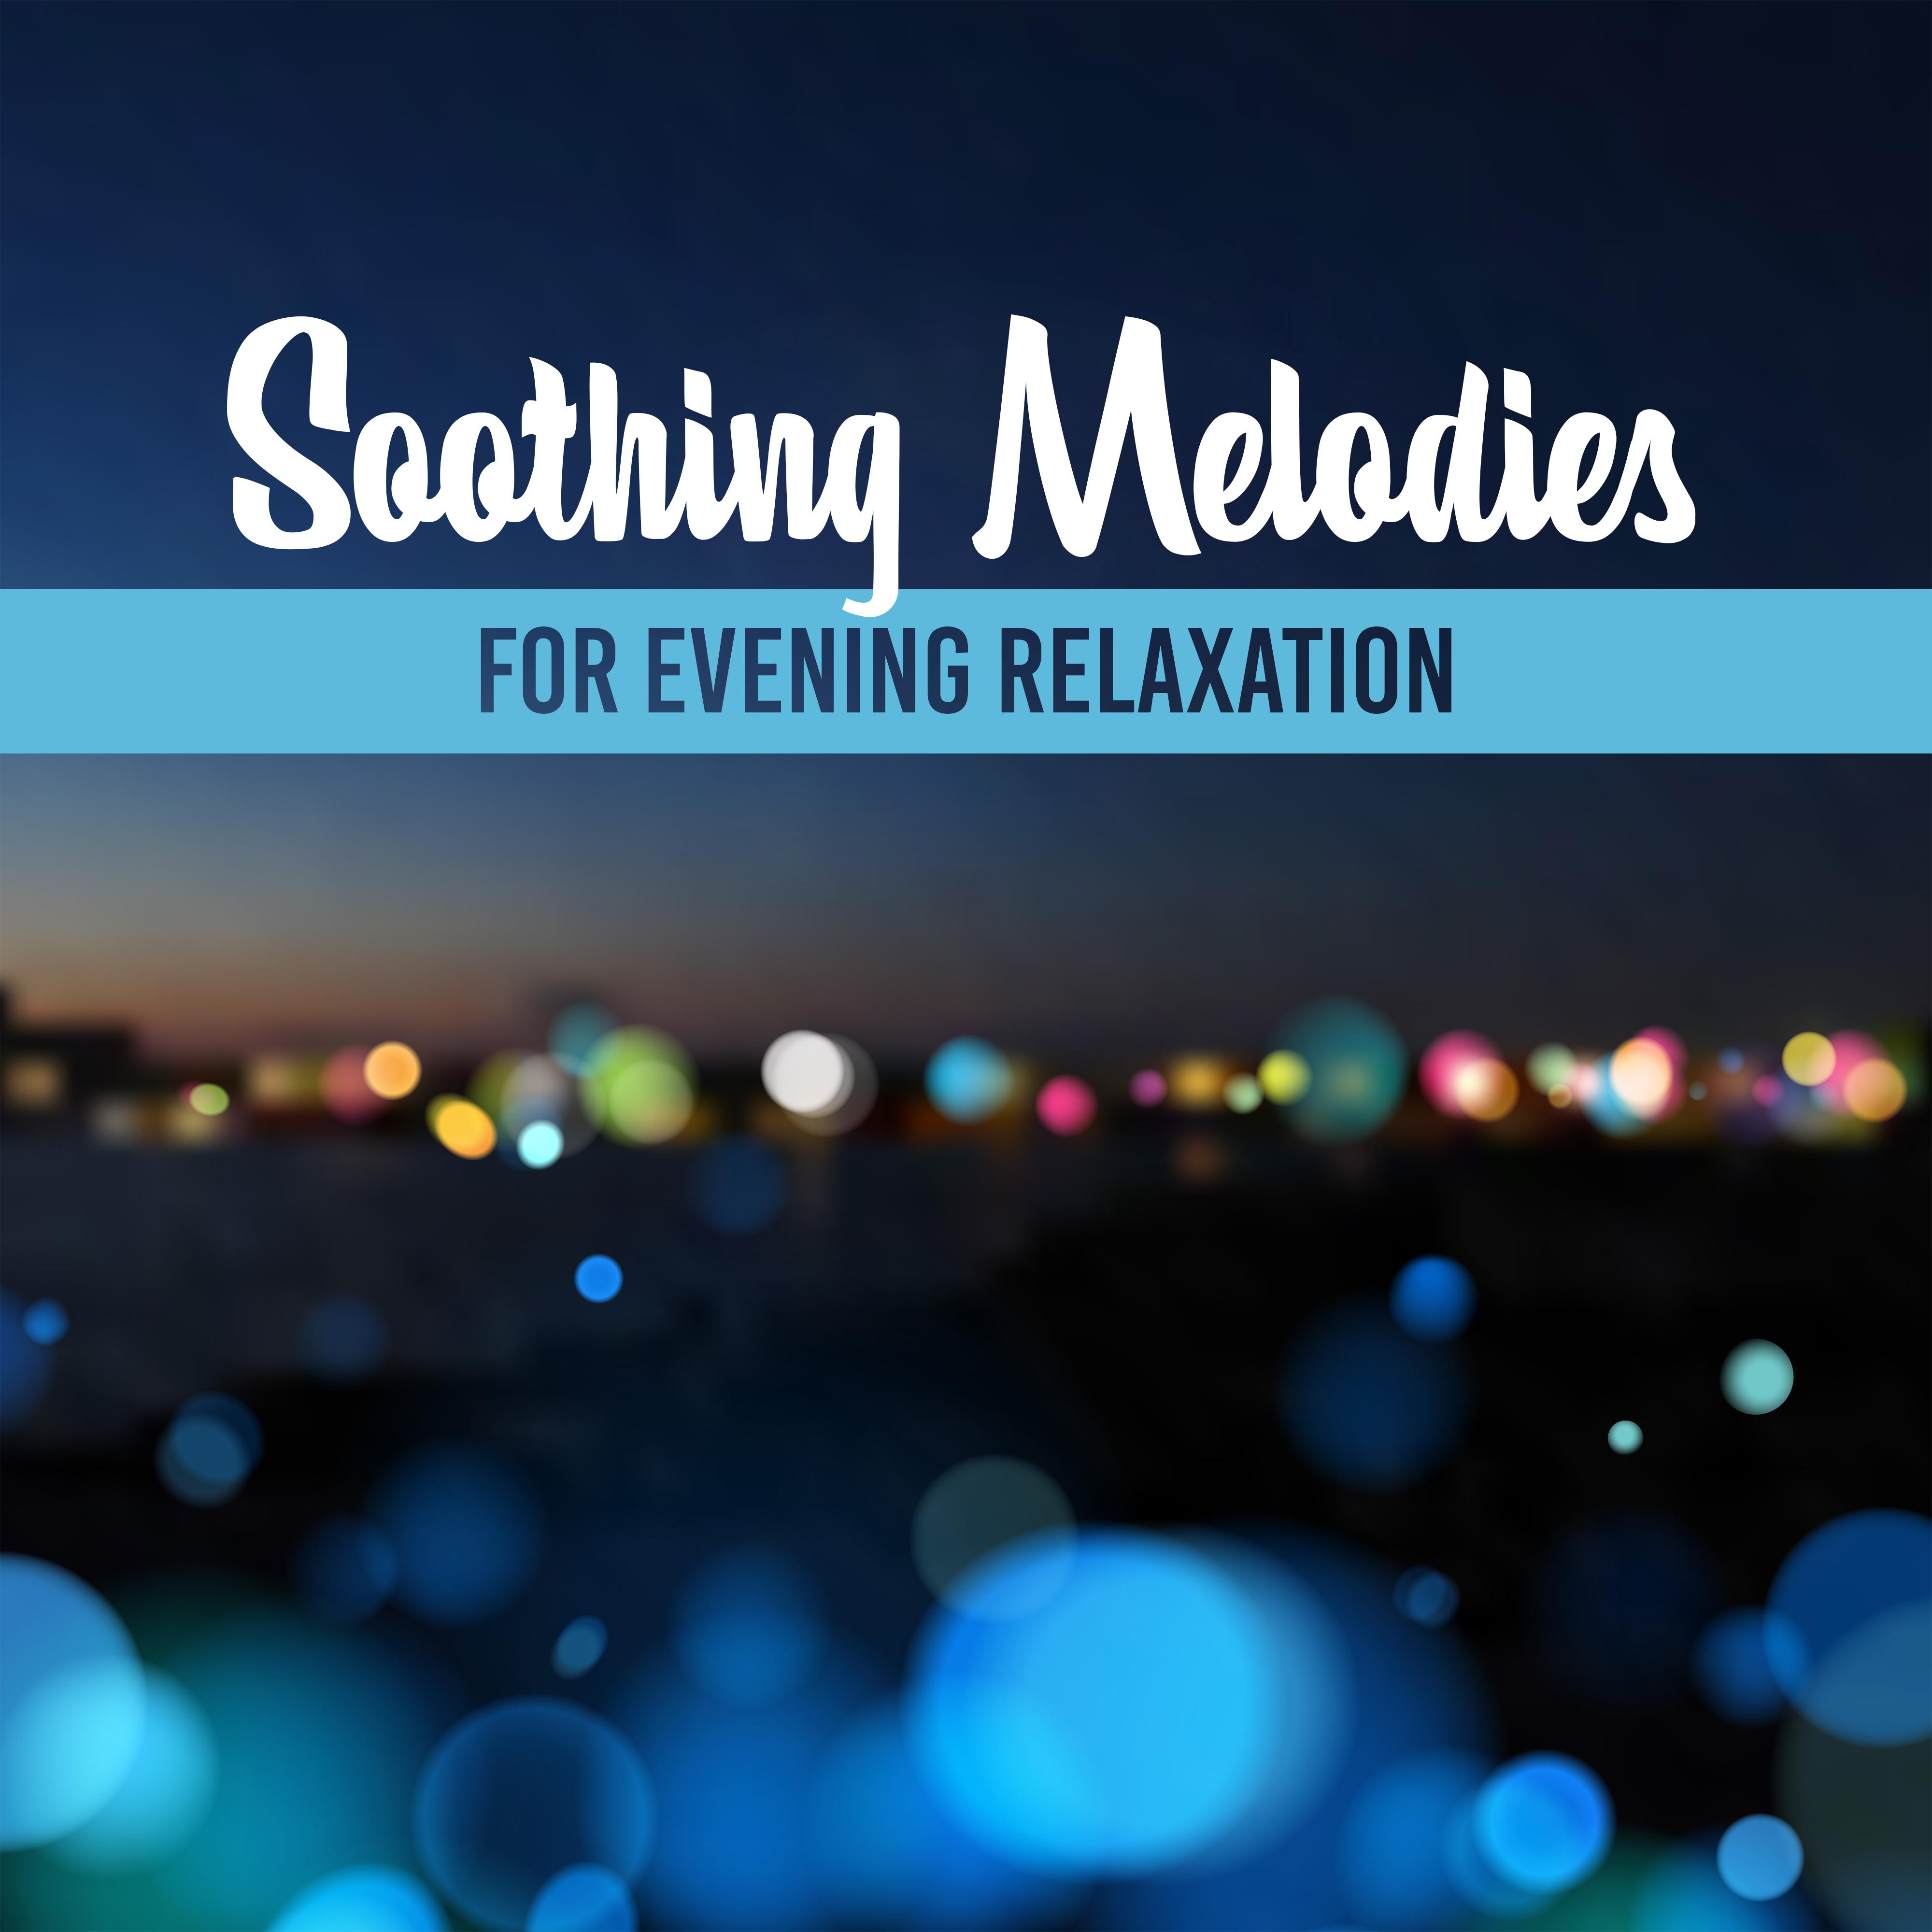 Soothing Melodies for Evening Relaxation